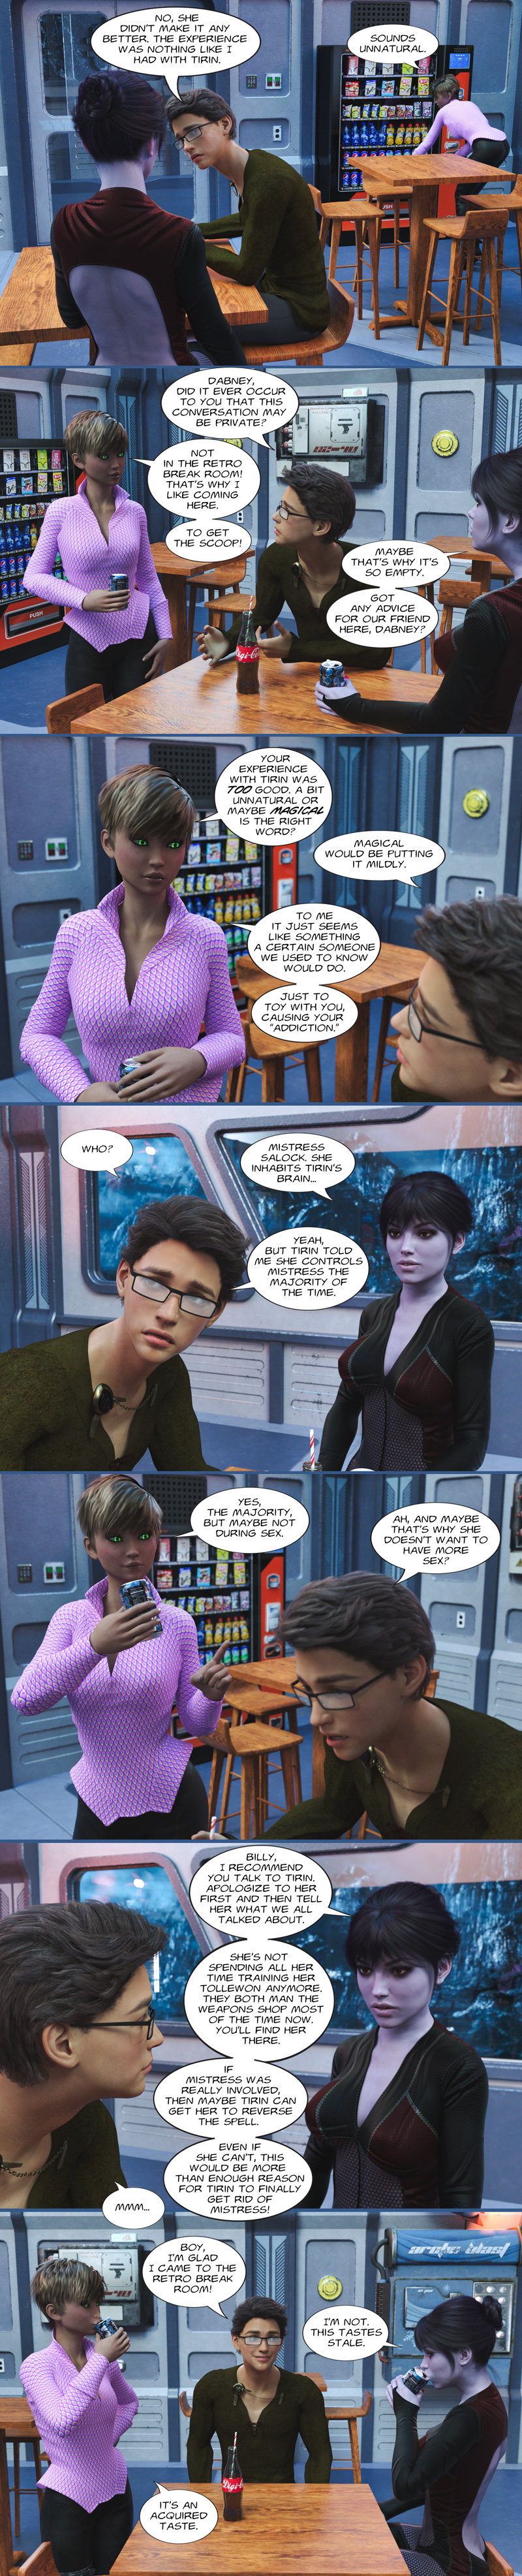 Chapter 20, page 6 – Dabney butts in